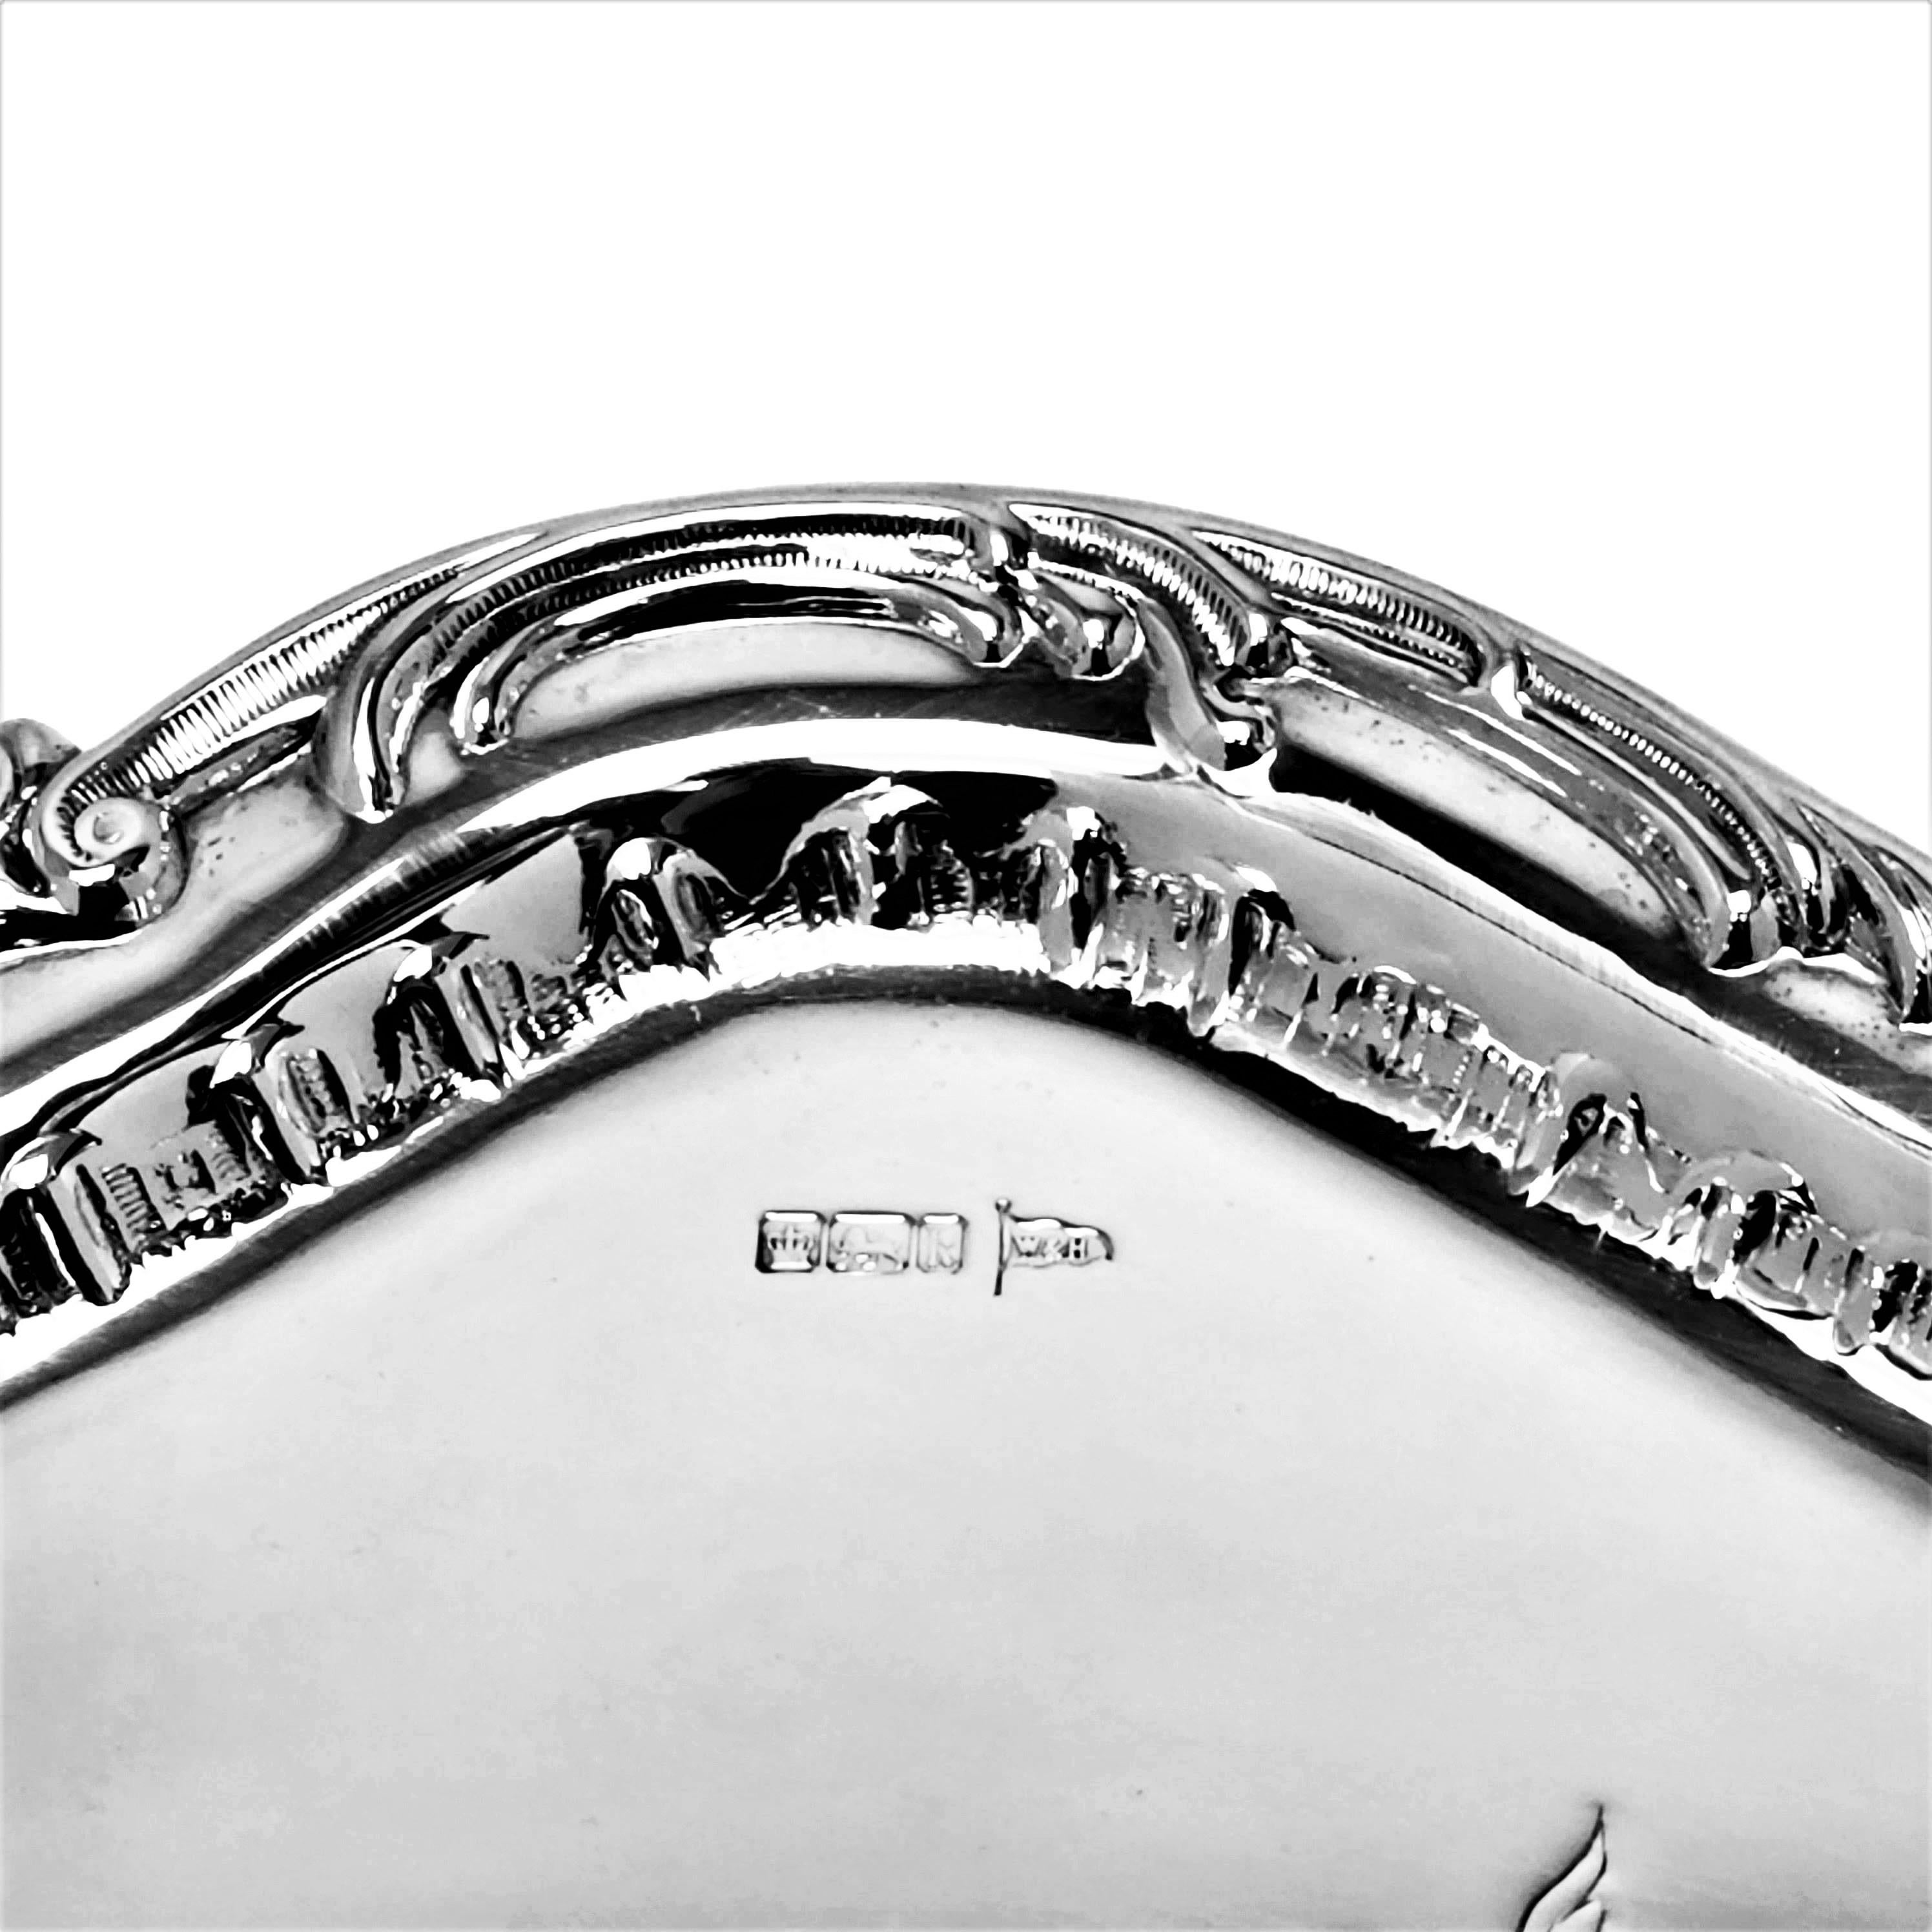 20th Century Antique Rococo Style Sterling Silver Salver Platter Tray 1902 For Sale